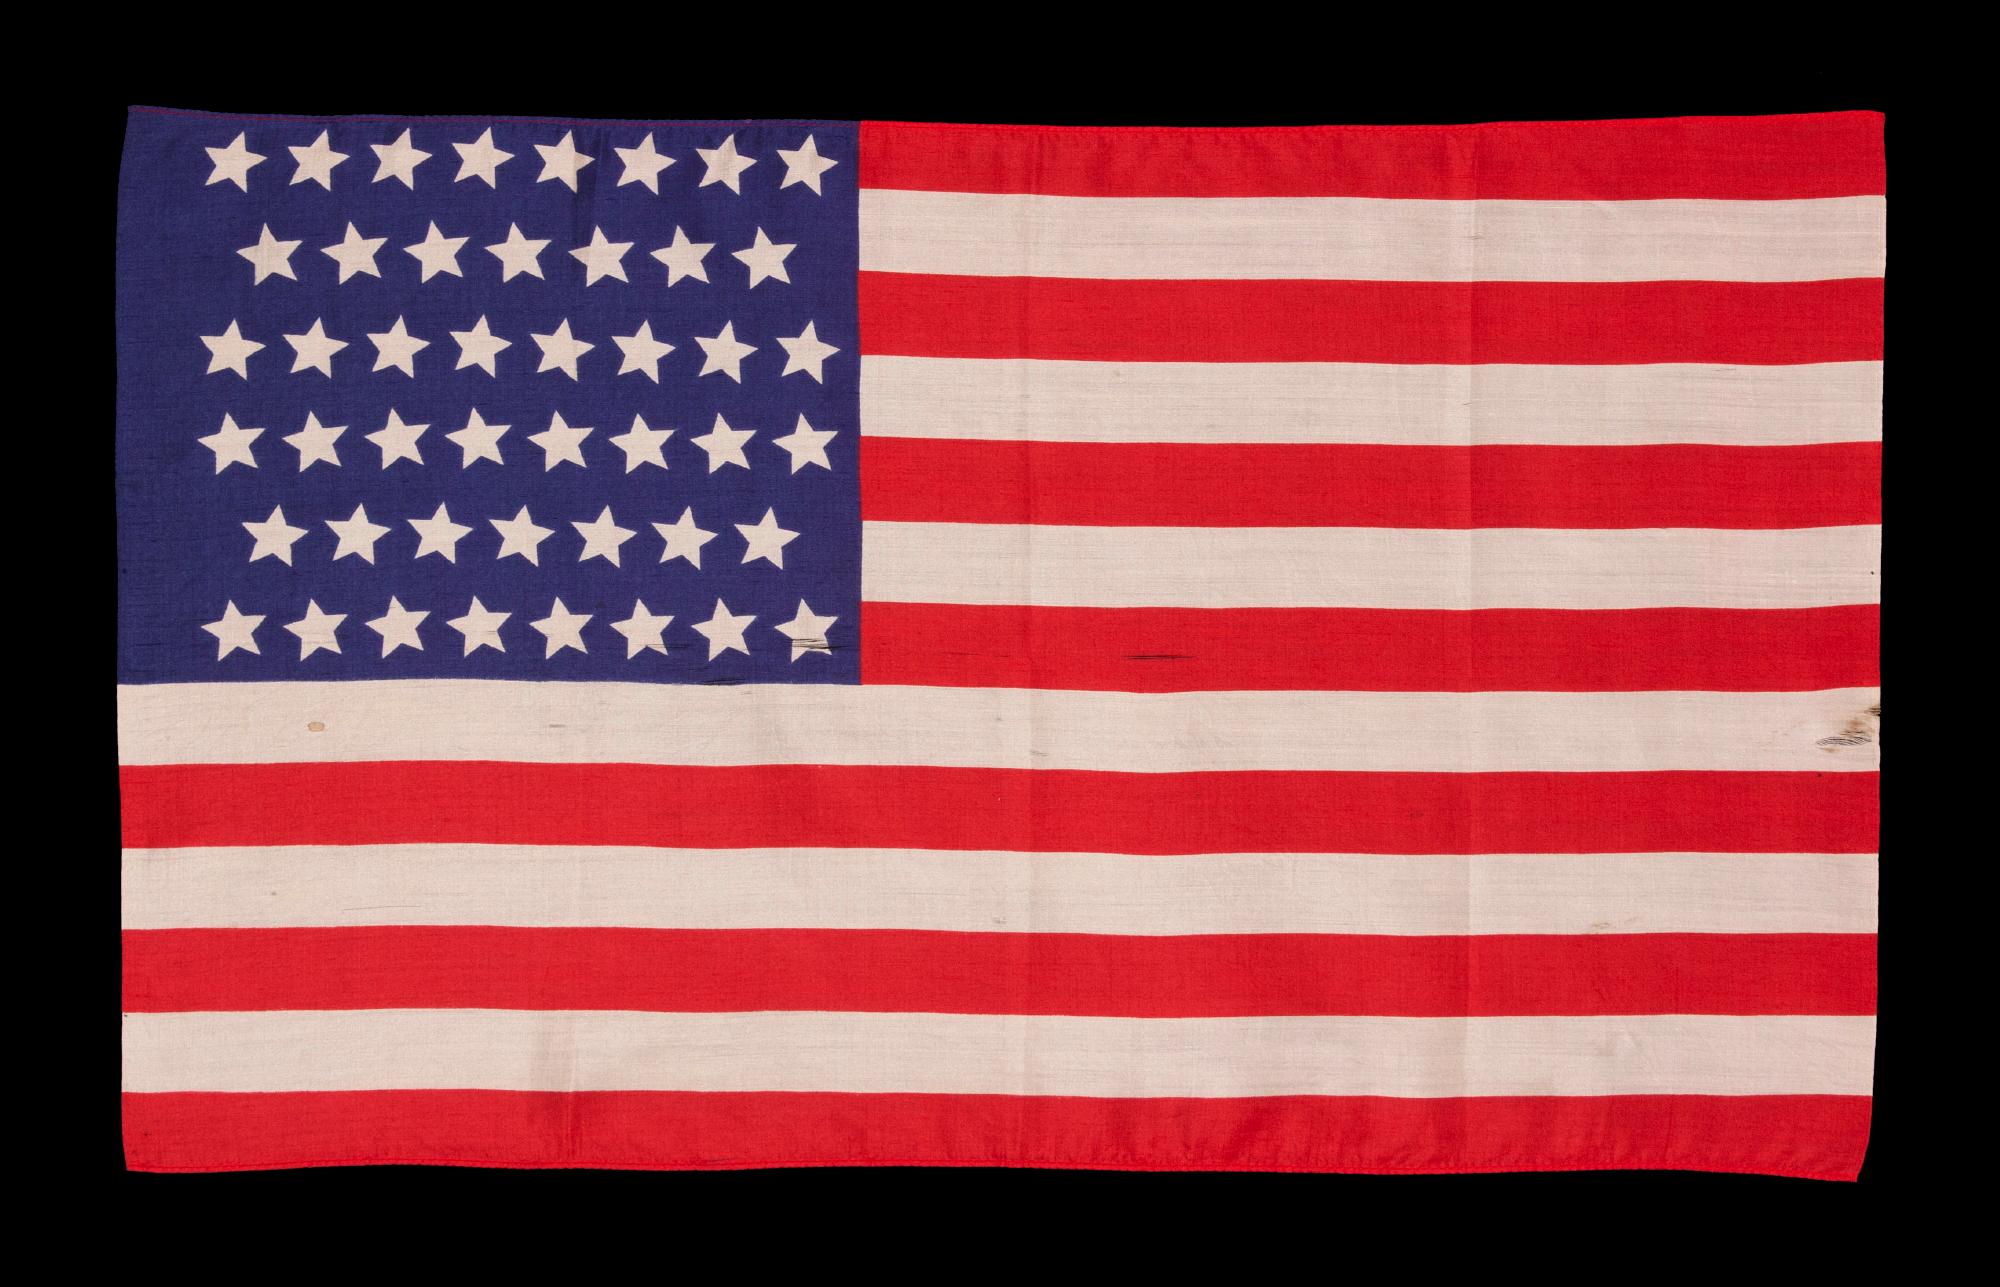 46 STAR, SLIK, ANTIQUE AMERICAN FLAG, WITH STARS IN CANTED ROWS, REFLECTS THE ADDITION OF OKLAHOMA TO THE UNION DURING THE PRESIDENCY OF THEODORE ROOSEVELT, 1907-1912

46 star American national parade flag, printed on silk, bound at the top and